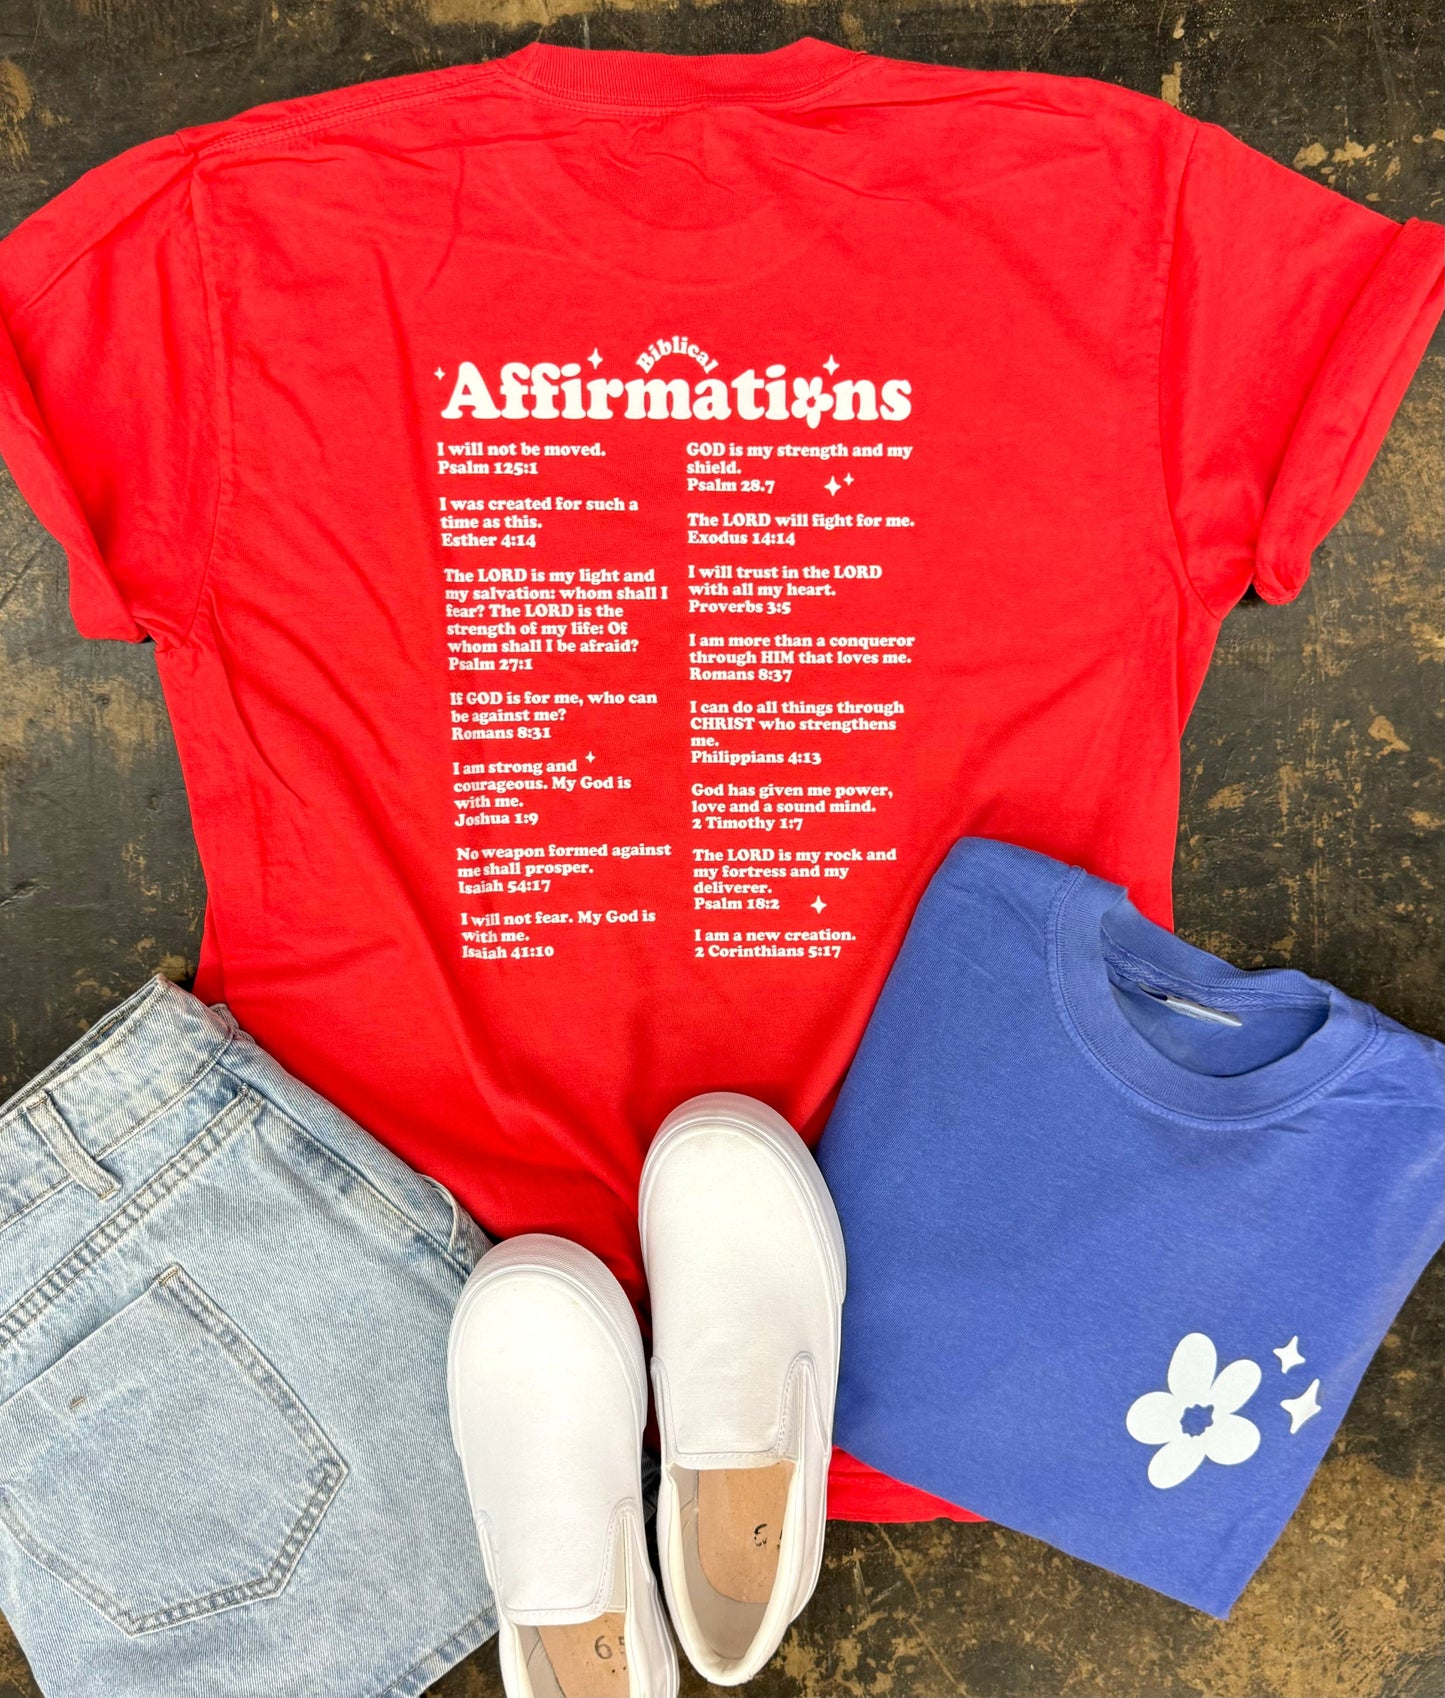 Affirmations tee